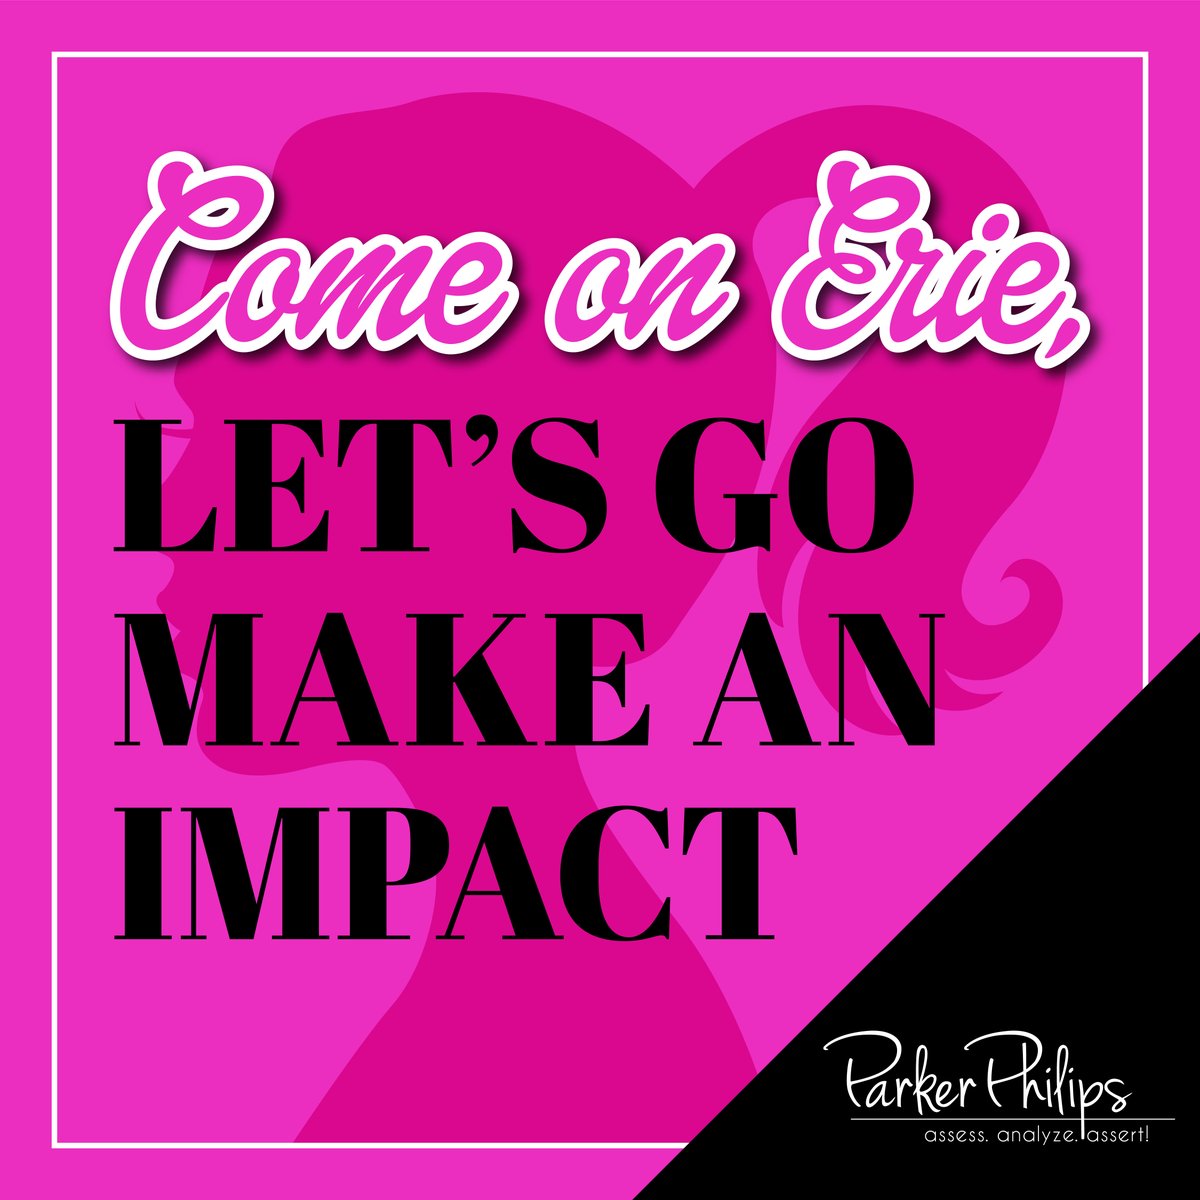 Hiya #Erie! Are you ready to #MakeAnImpact? #TeamParkerPhilips is proud to work with @ECGRA814, @DiverseErie, and @InfiniteErie to make true change across #ErieCounty. Give these organizations a follow to stay up to date on all their projects! #BarbieMovie #Barbie